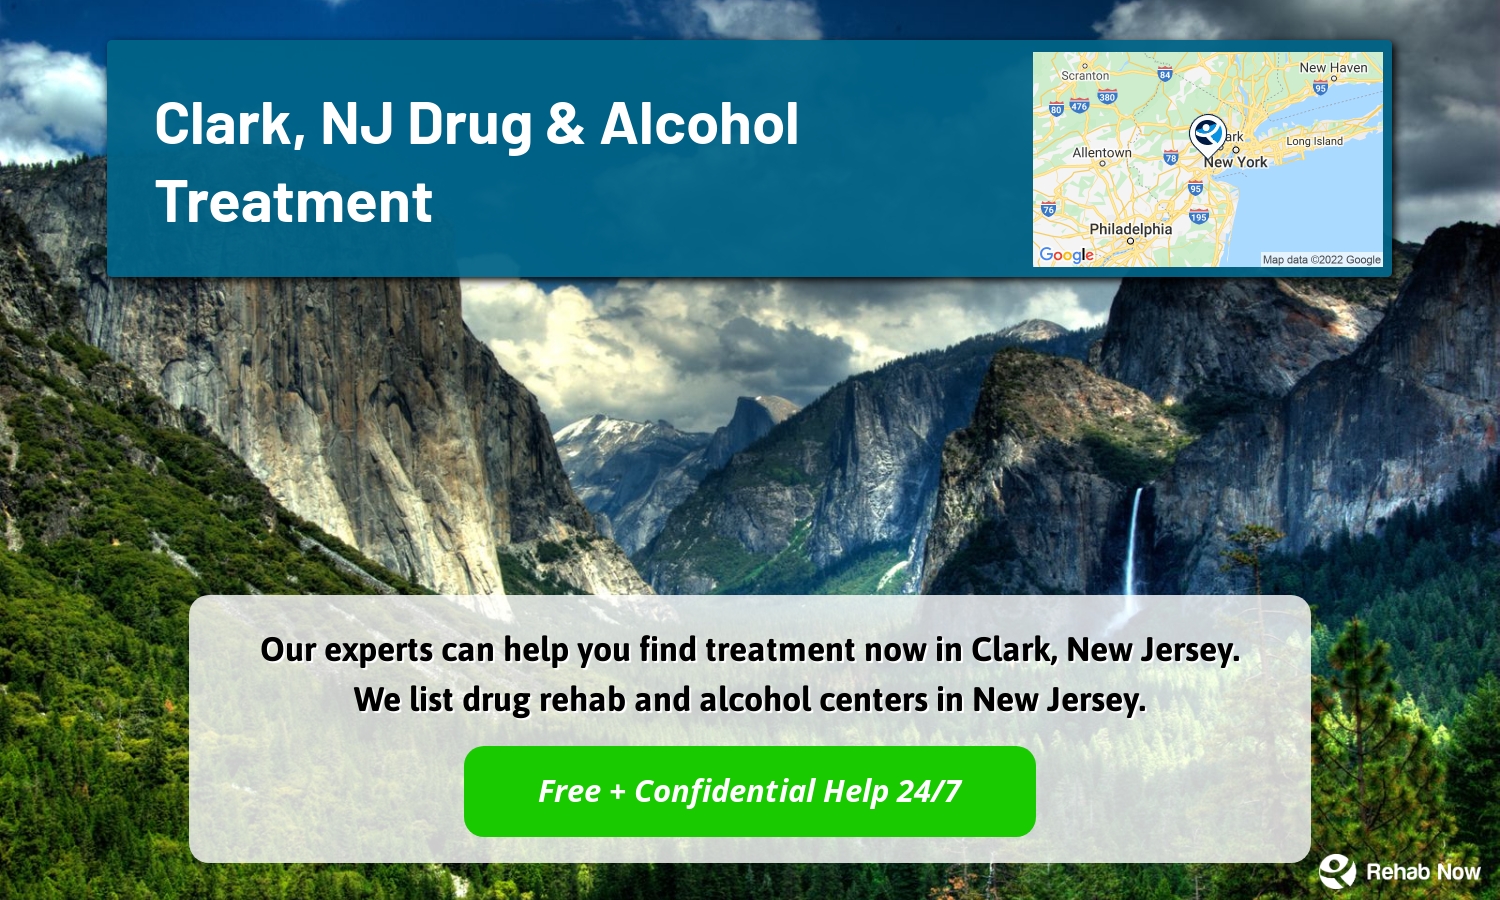 Our experts can help you find treatment now in Clark, New Jersey. We list drug rehab and alcohol centers in New Jersey.